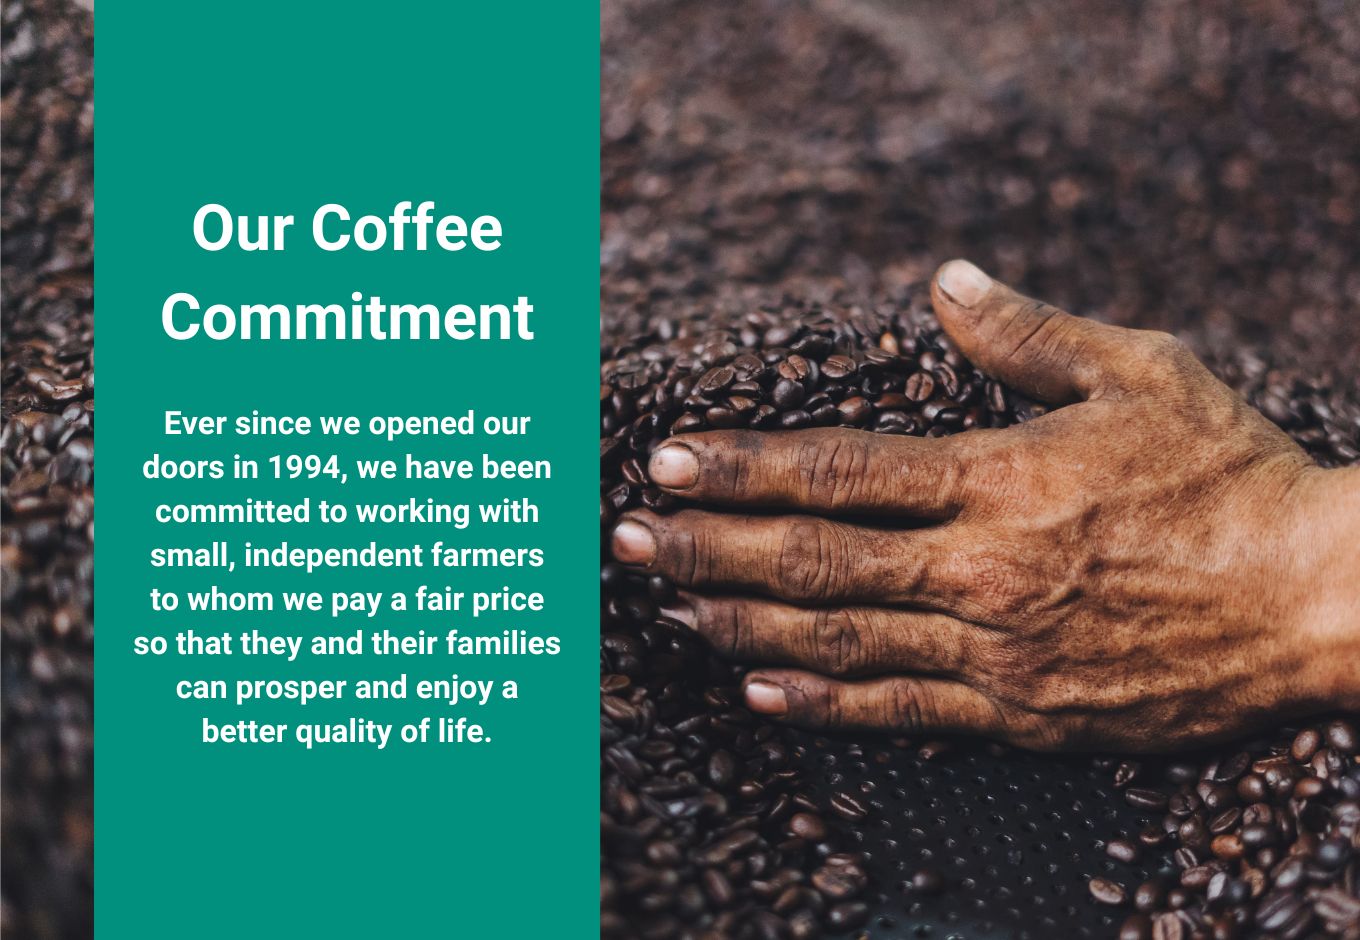 Our Coffee Commitment